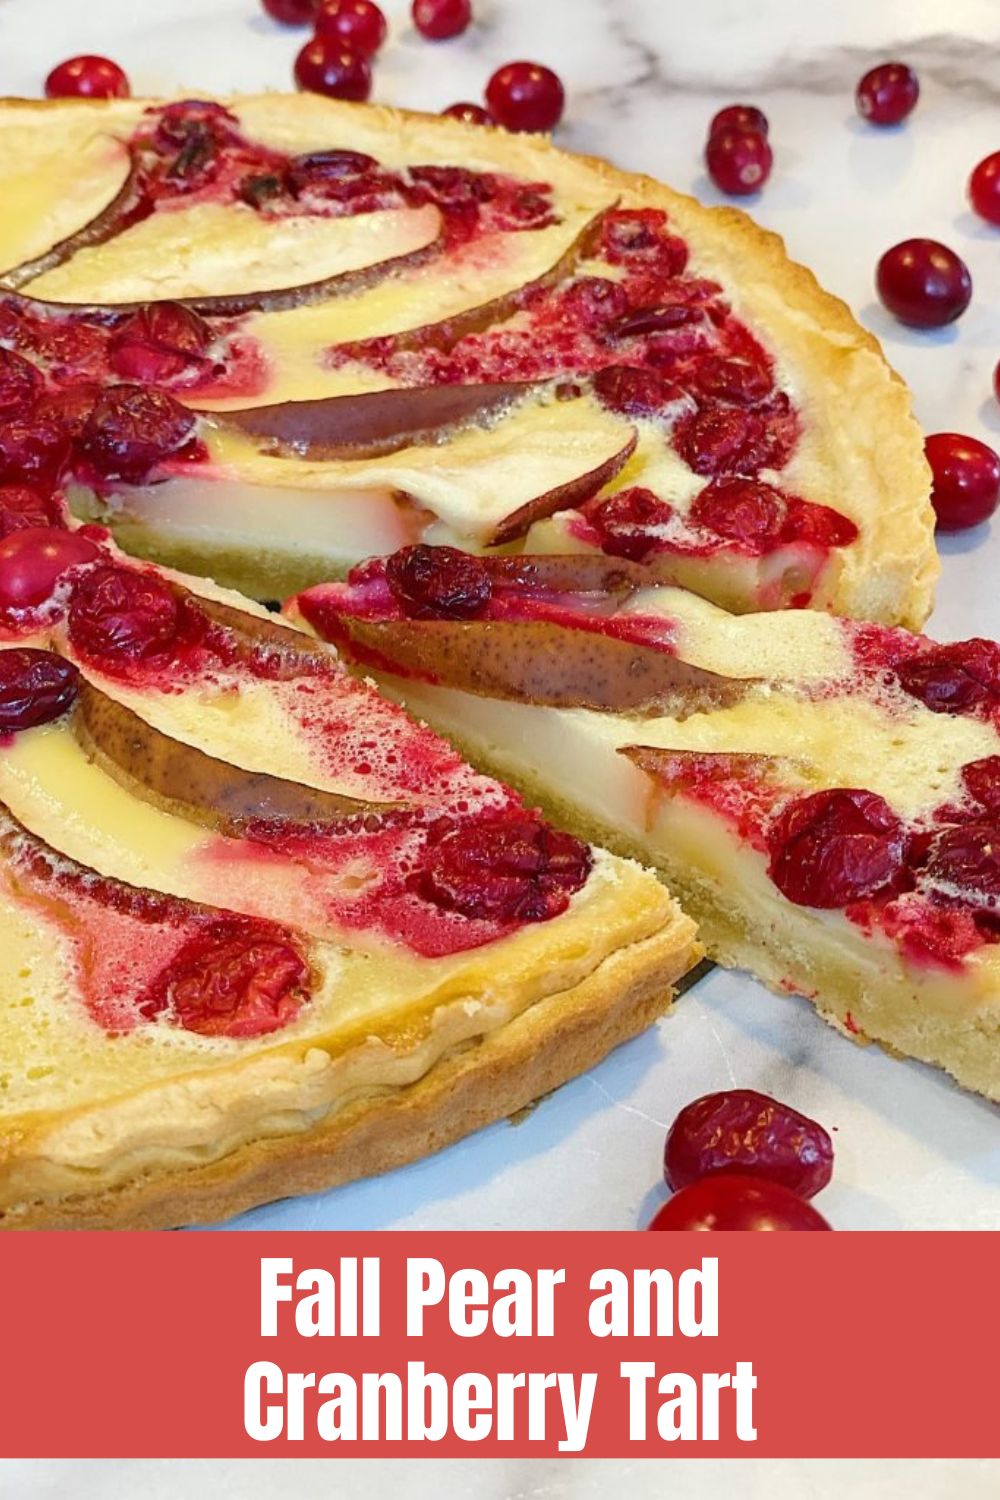 This fall pear and cranberry tart is amazing. It is a perfect combination of sweet and tart and this is a must recipe for fall baking.